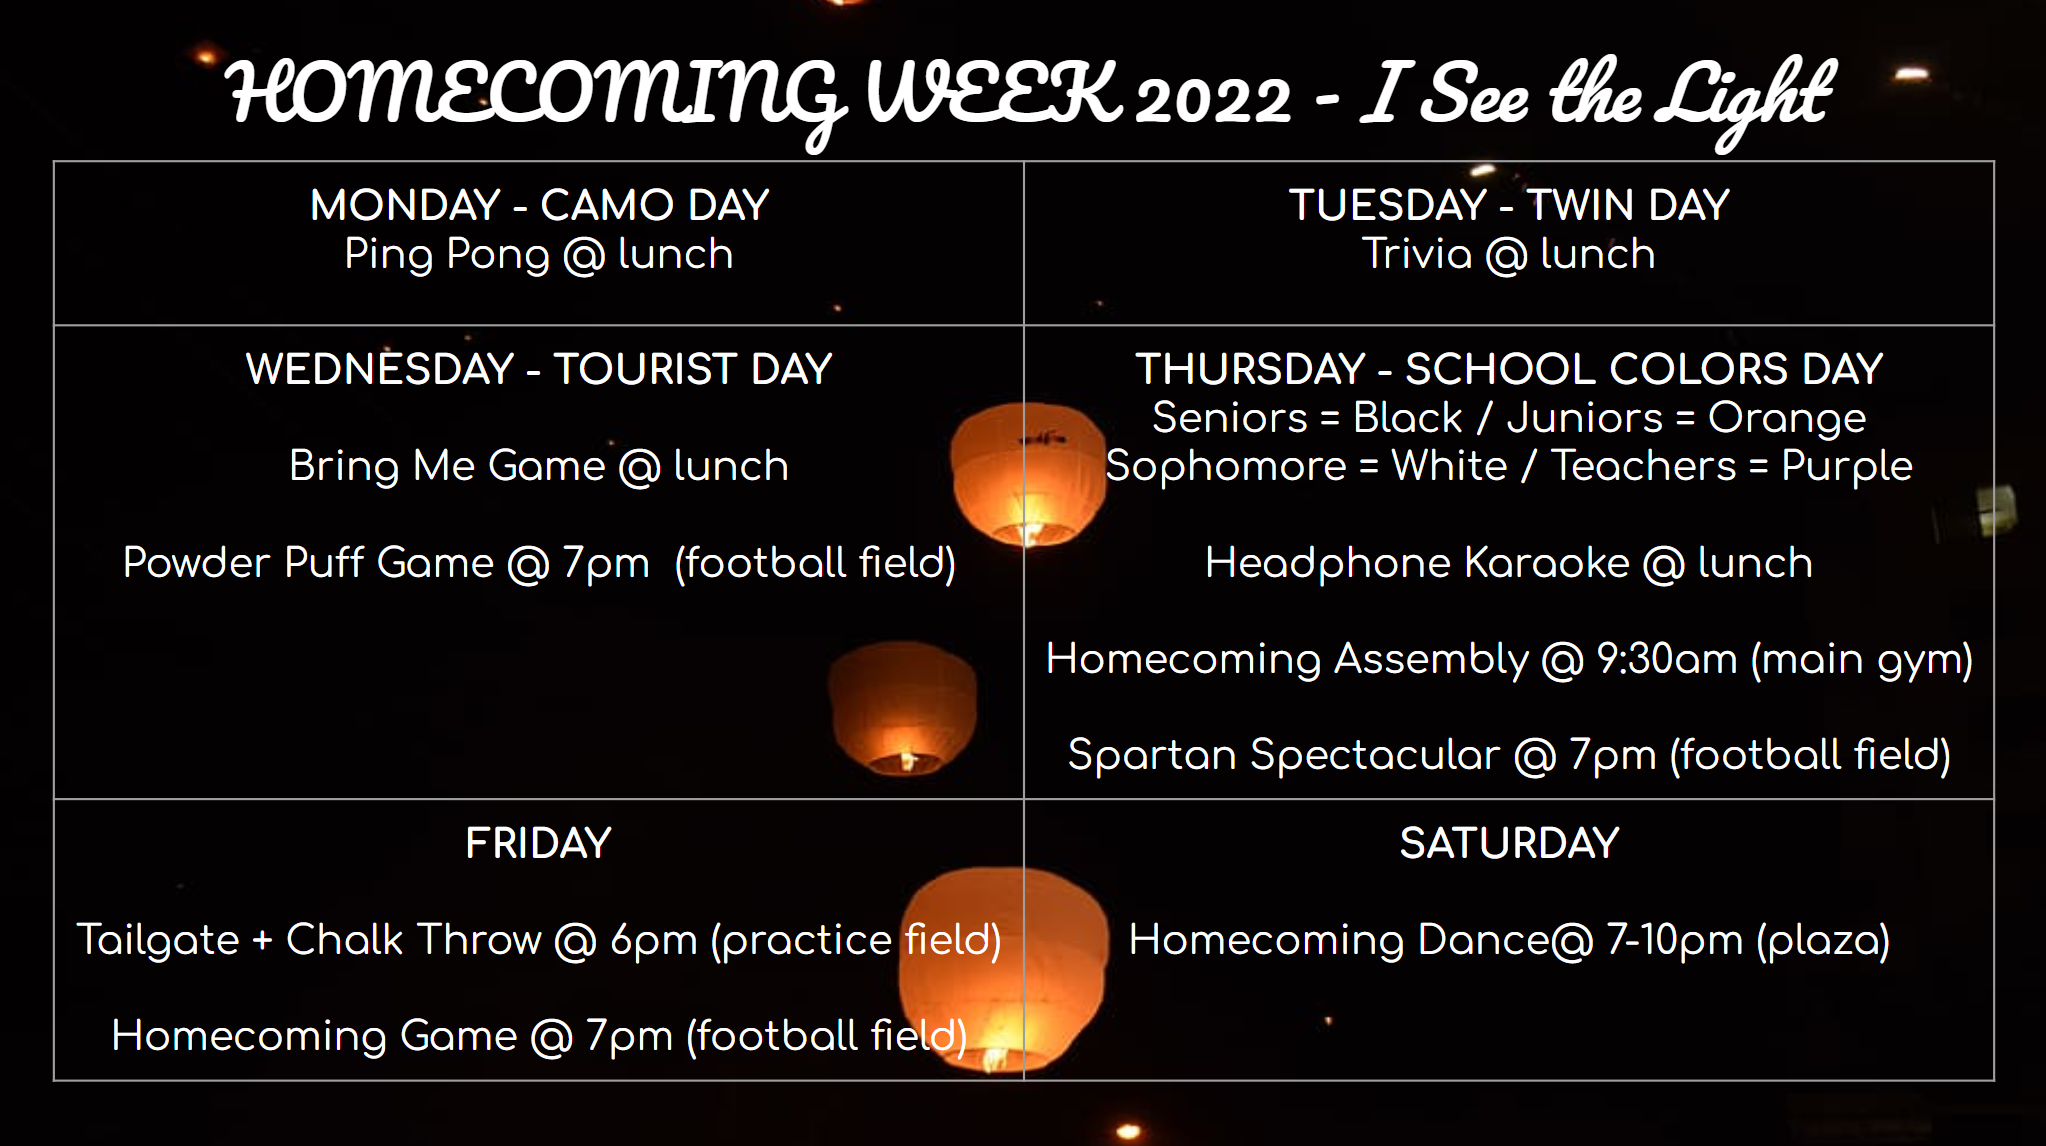 Homecoming Week 2022 dress up days: Monday cammo, Tuesday twin day, Wednesday tourist day, Thursday school colors day, Friday homecoming game at 7 pm, Saturday homecoming dance at 7 pm